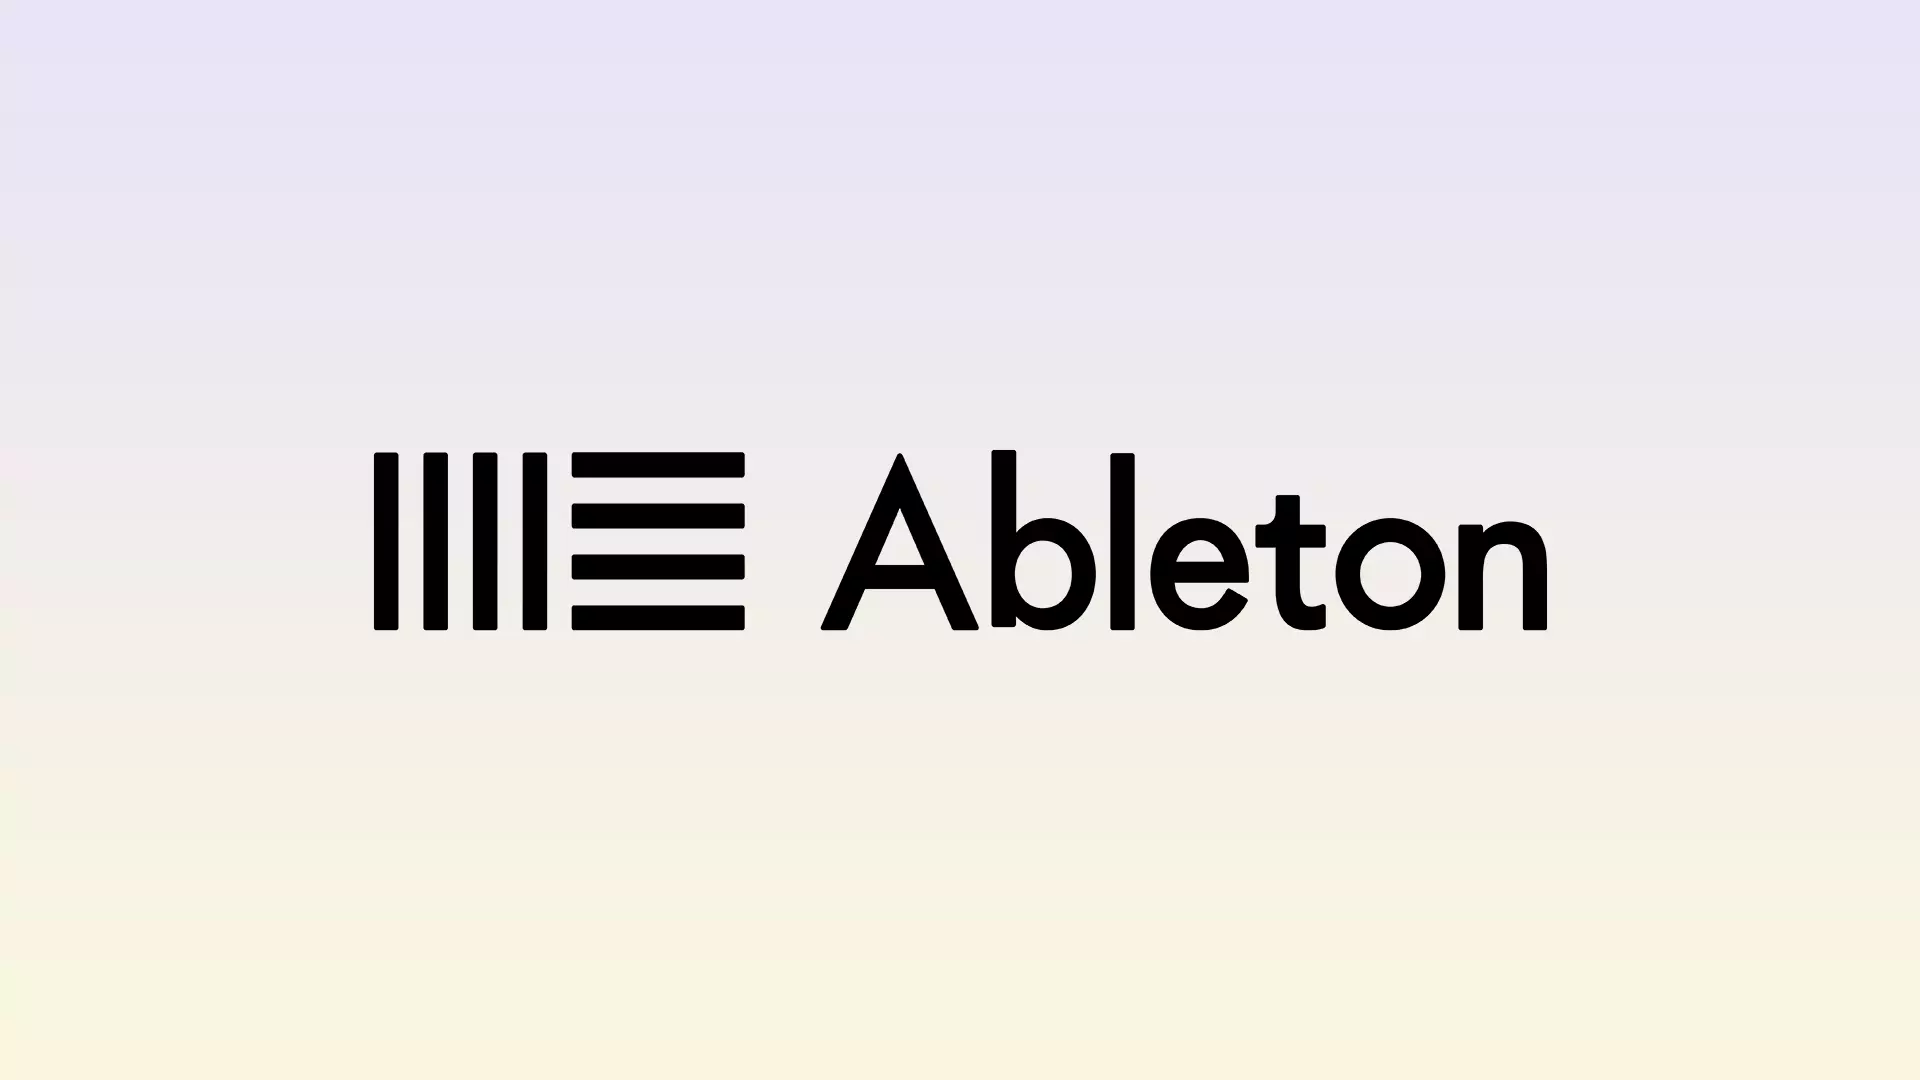 Ableton is available at a 25 percent discount for Labor Day